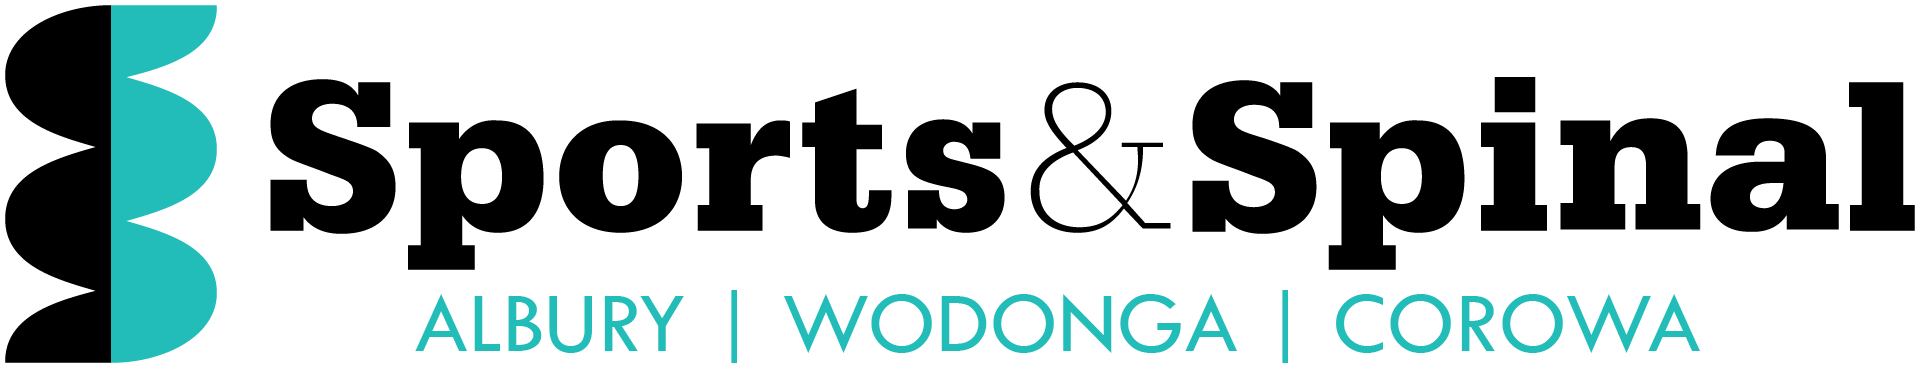 Sport-and-spinal-albury-wodonga-logo-updated-subtext-best-one